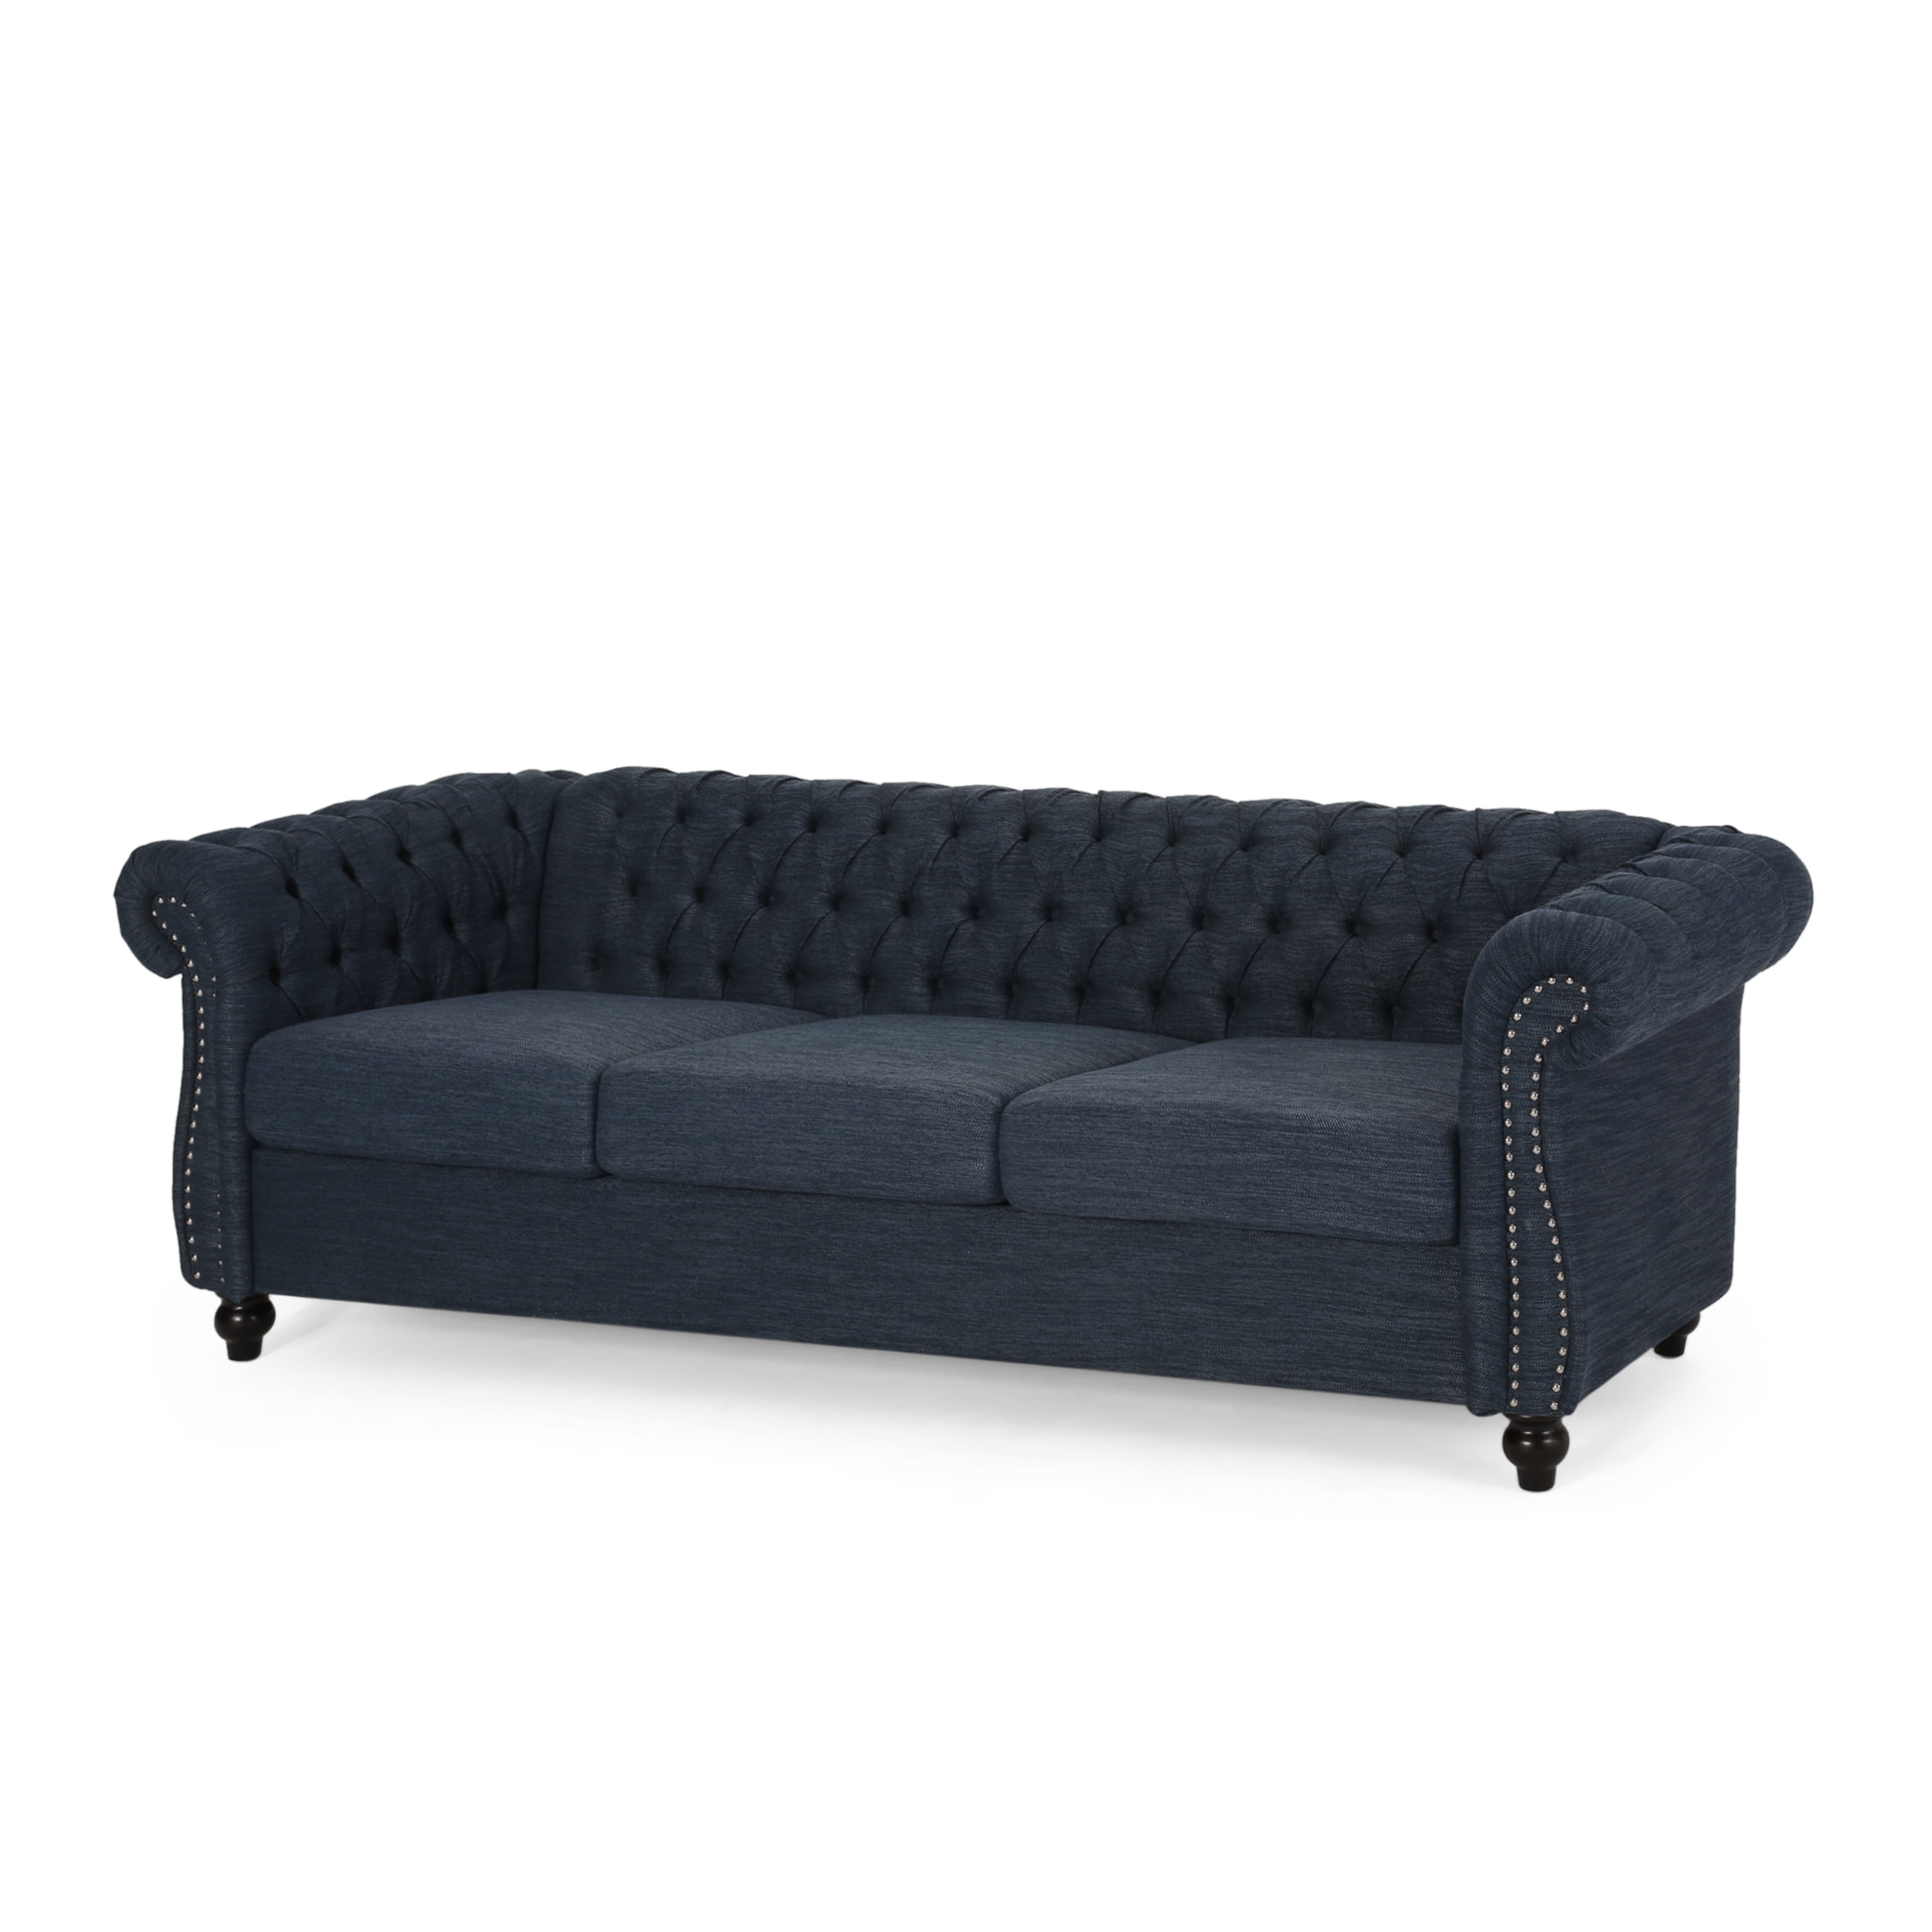 afsnit reductor depositum Noble House Augus Fabric Tufted 3 Seater Sofa, Charcoal, Dark Brown -  Walmart.com